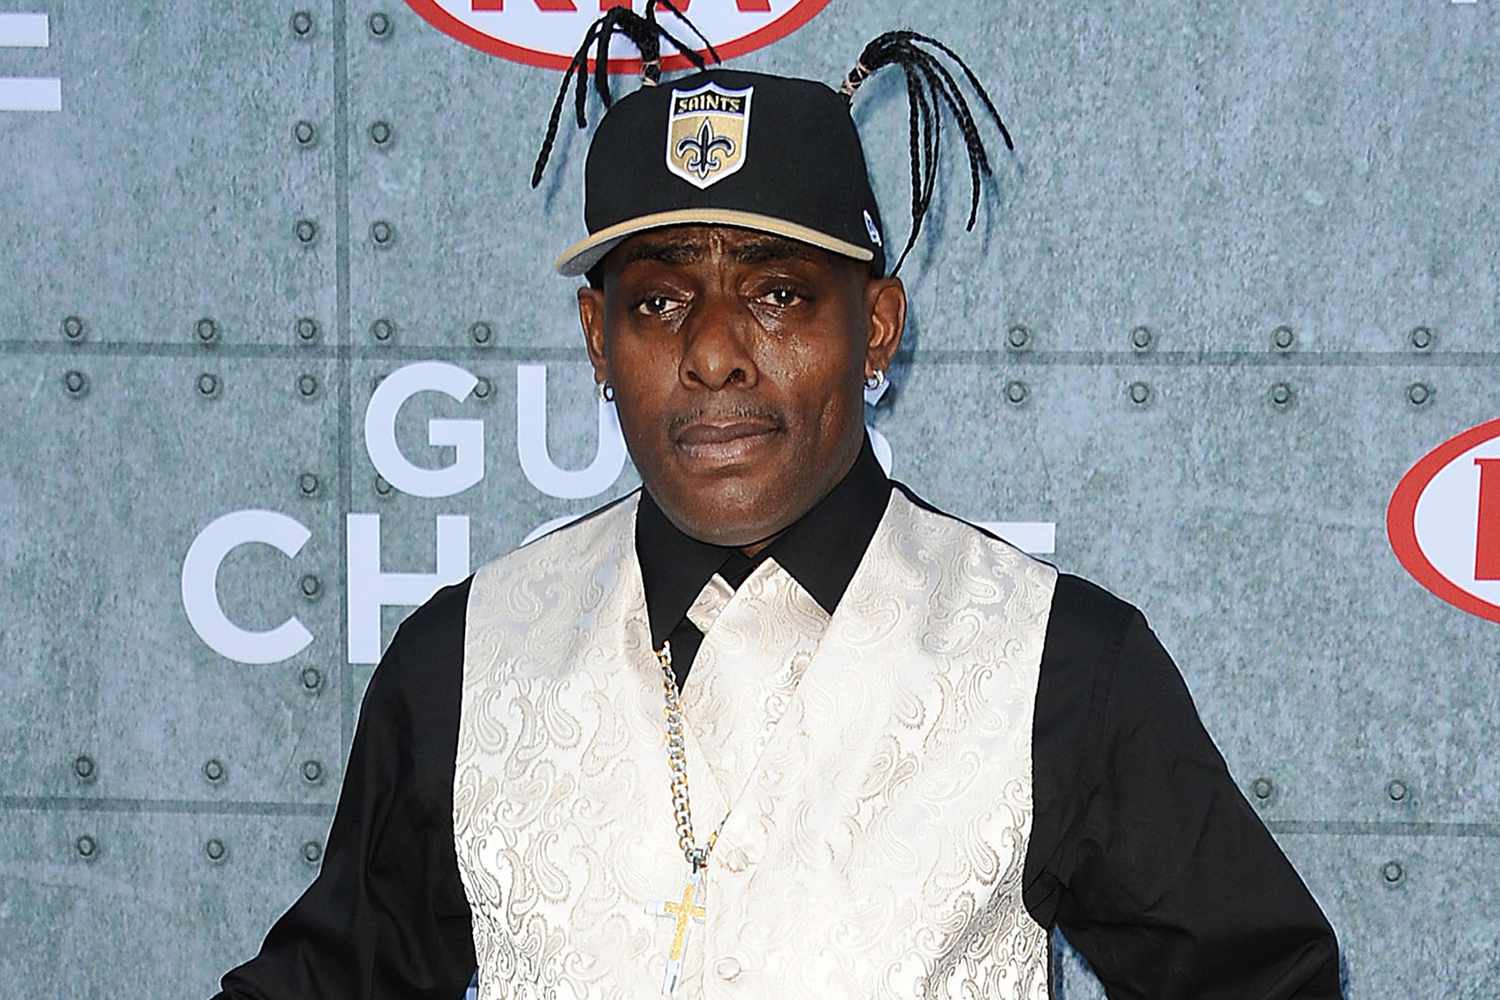 Coolio’s cause of death revealed as fentanyl and other drugs